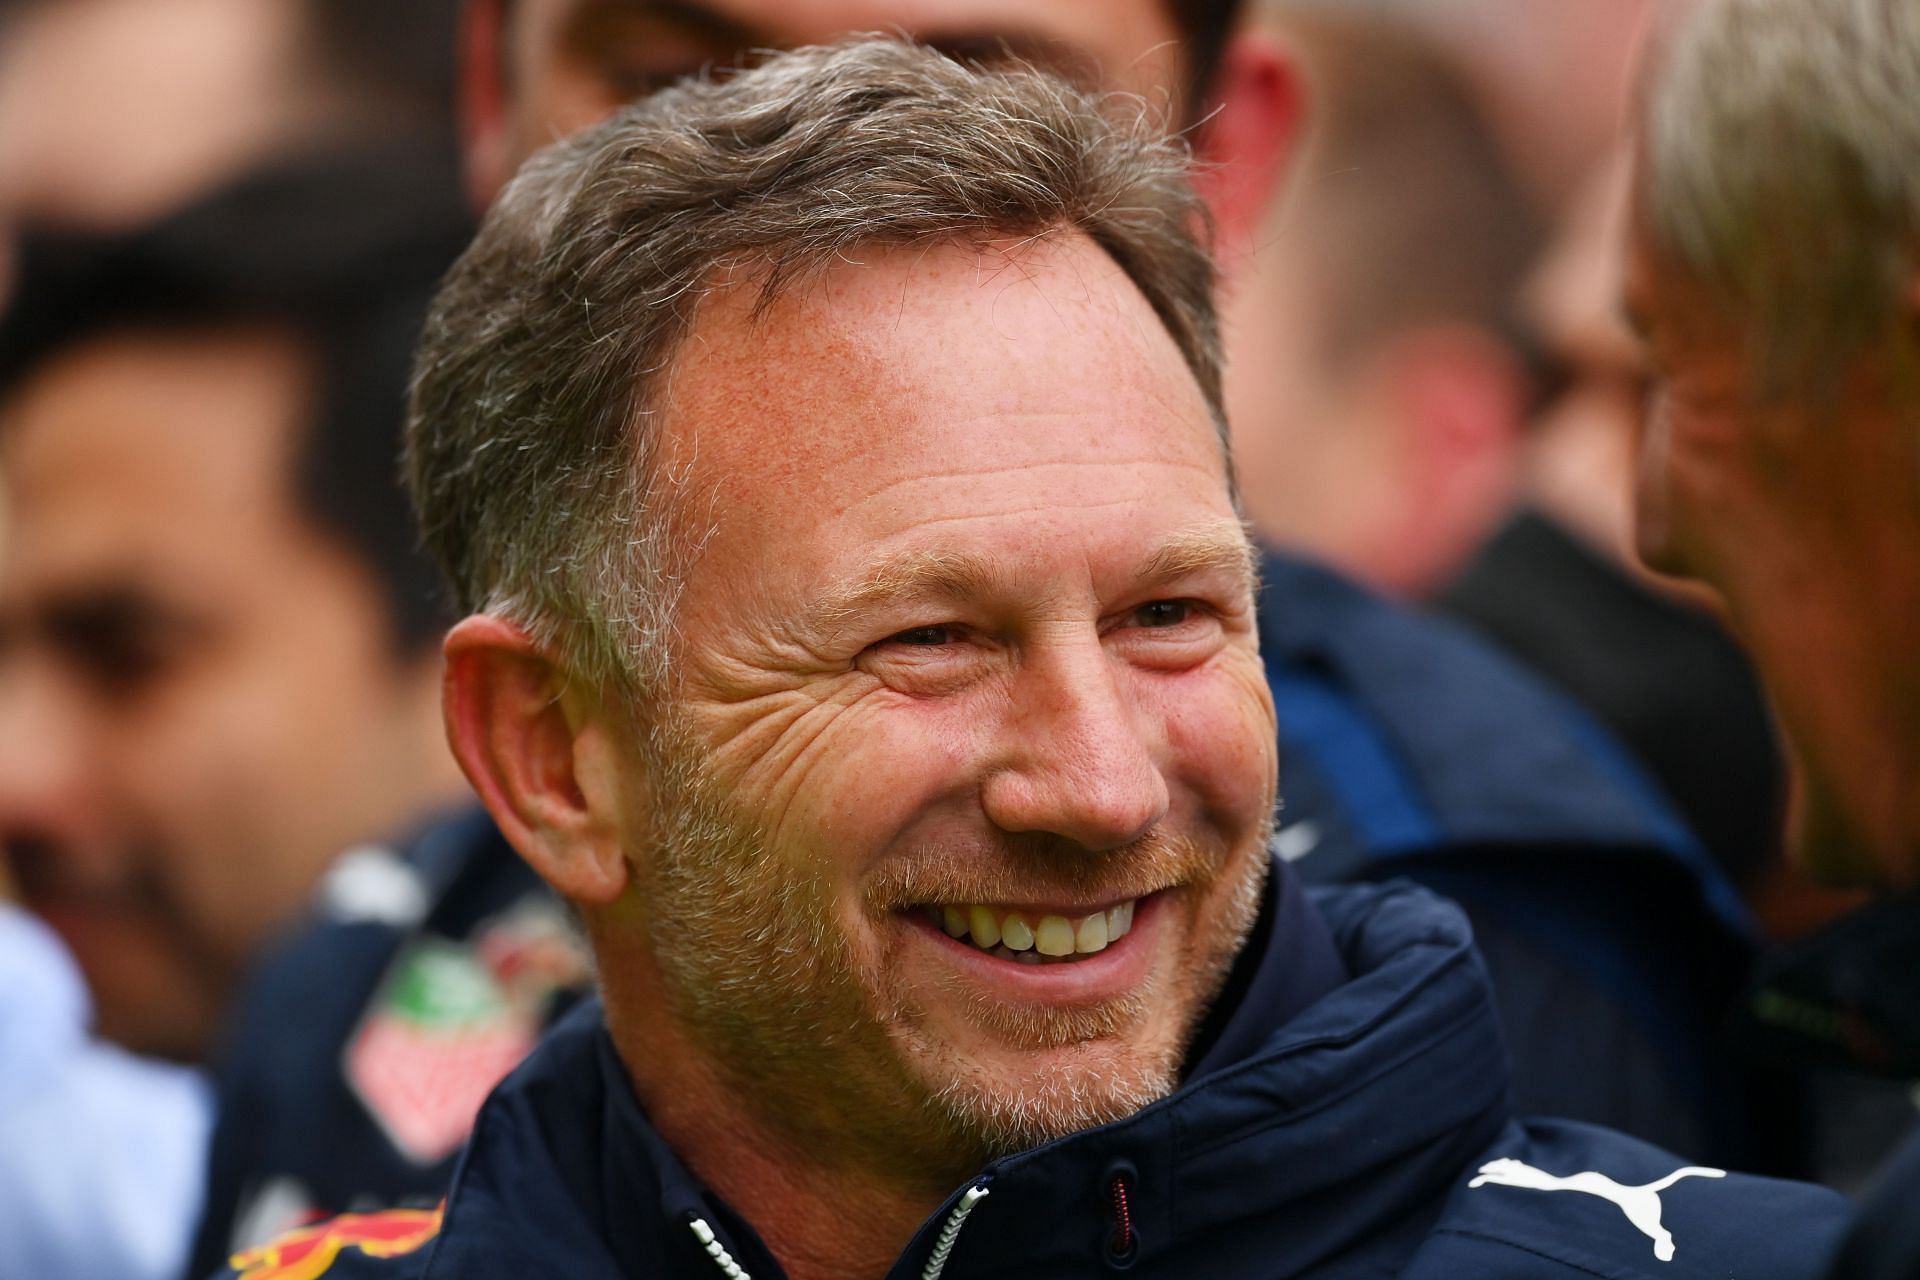 Red Bull Racing Team Principal Christian Horner smiles in parc ferme during the F1 Grand Prix of Emilia Romagna at Autodromo Enzo e Dino Ferrari on April 24, 2022 in Imola, Italy. (Photo by Dan Mullan/Getty Images)